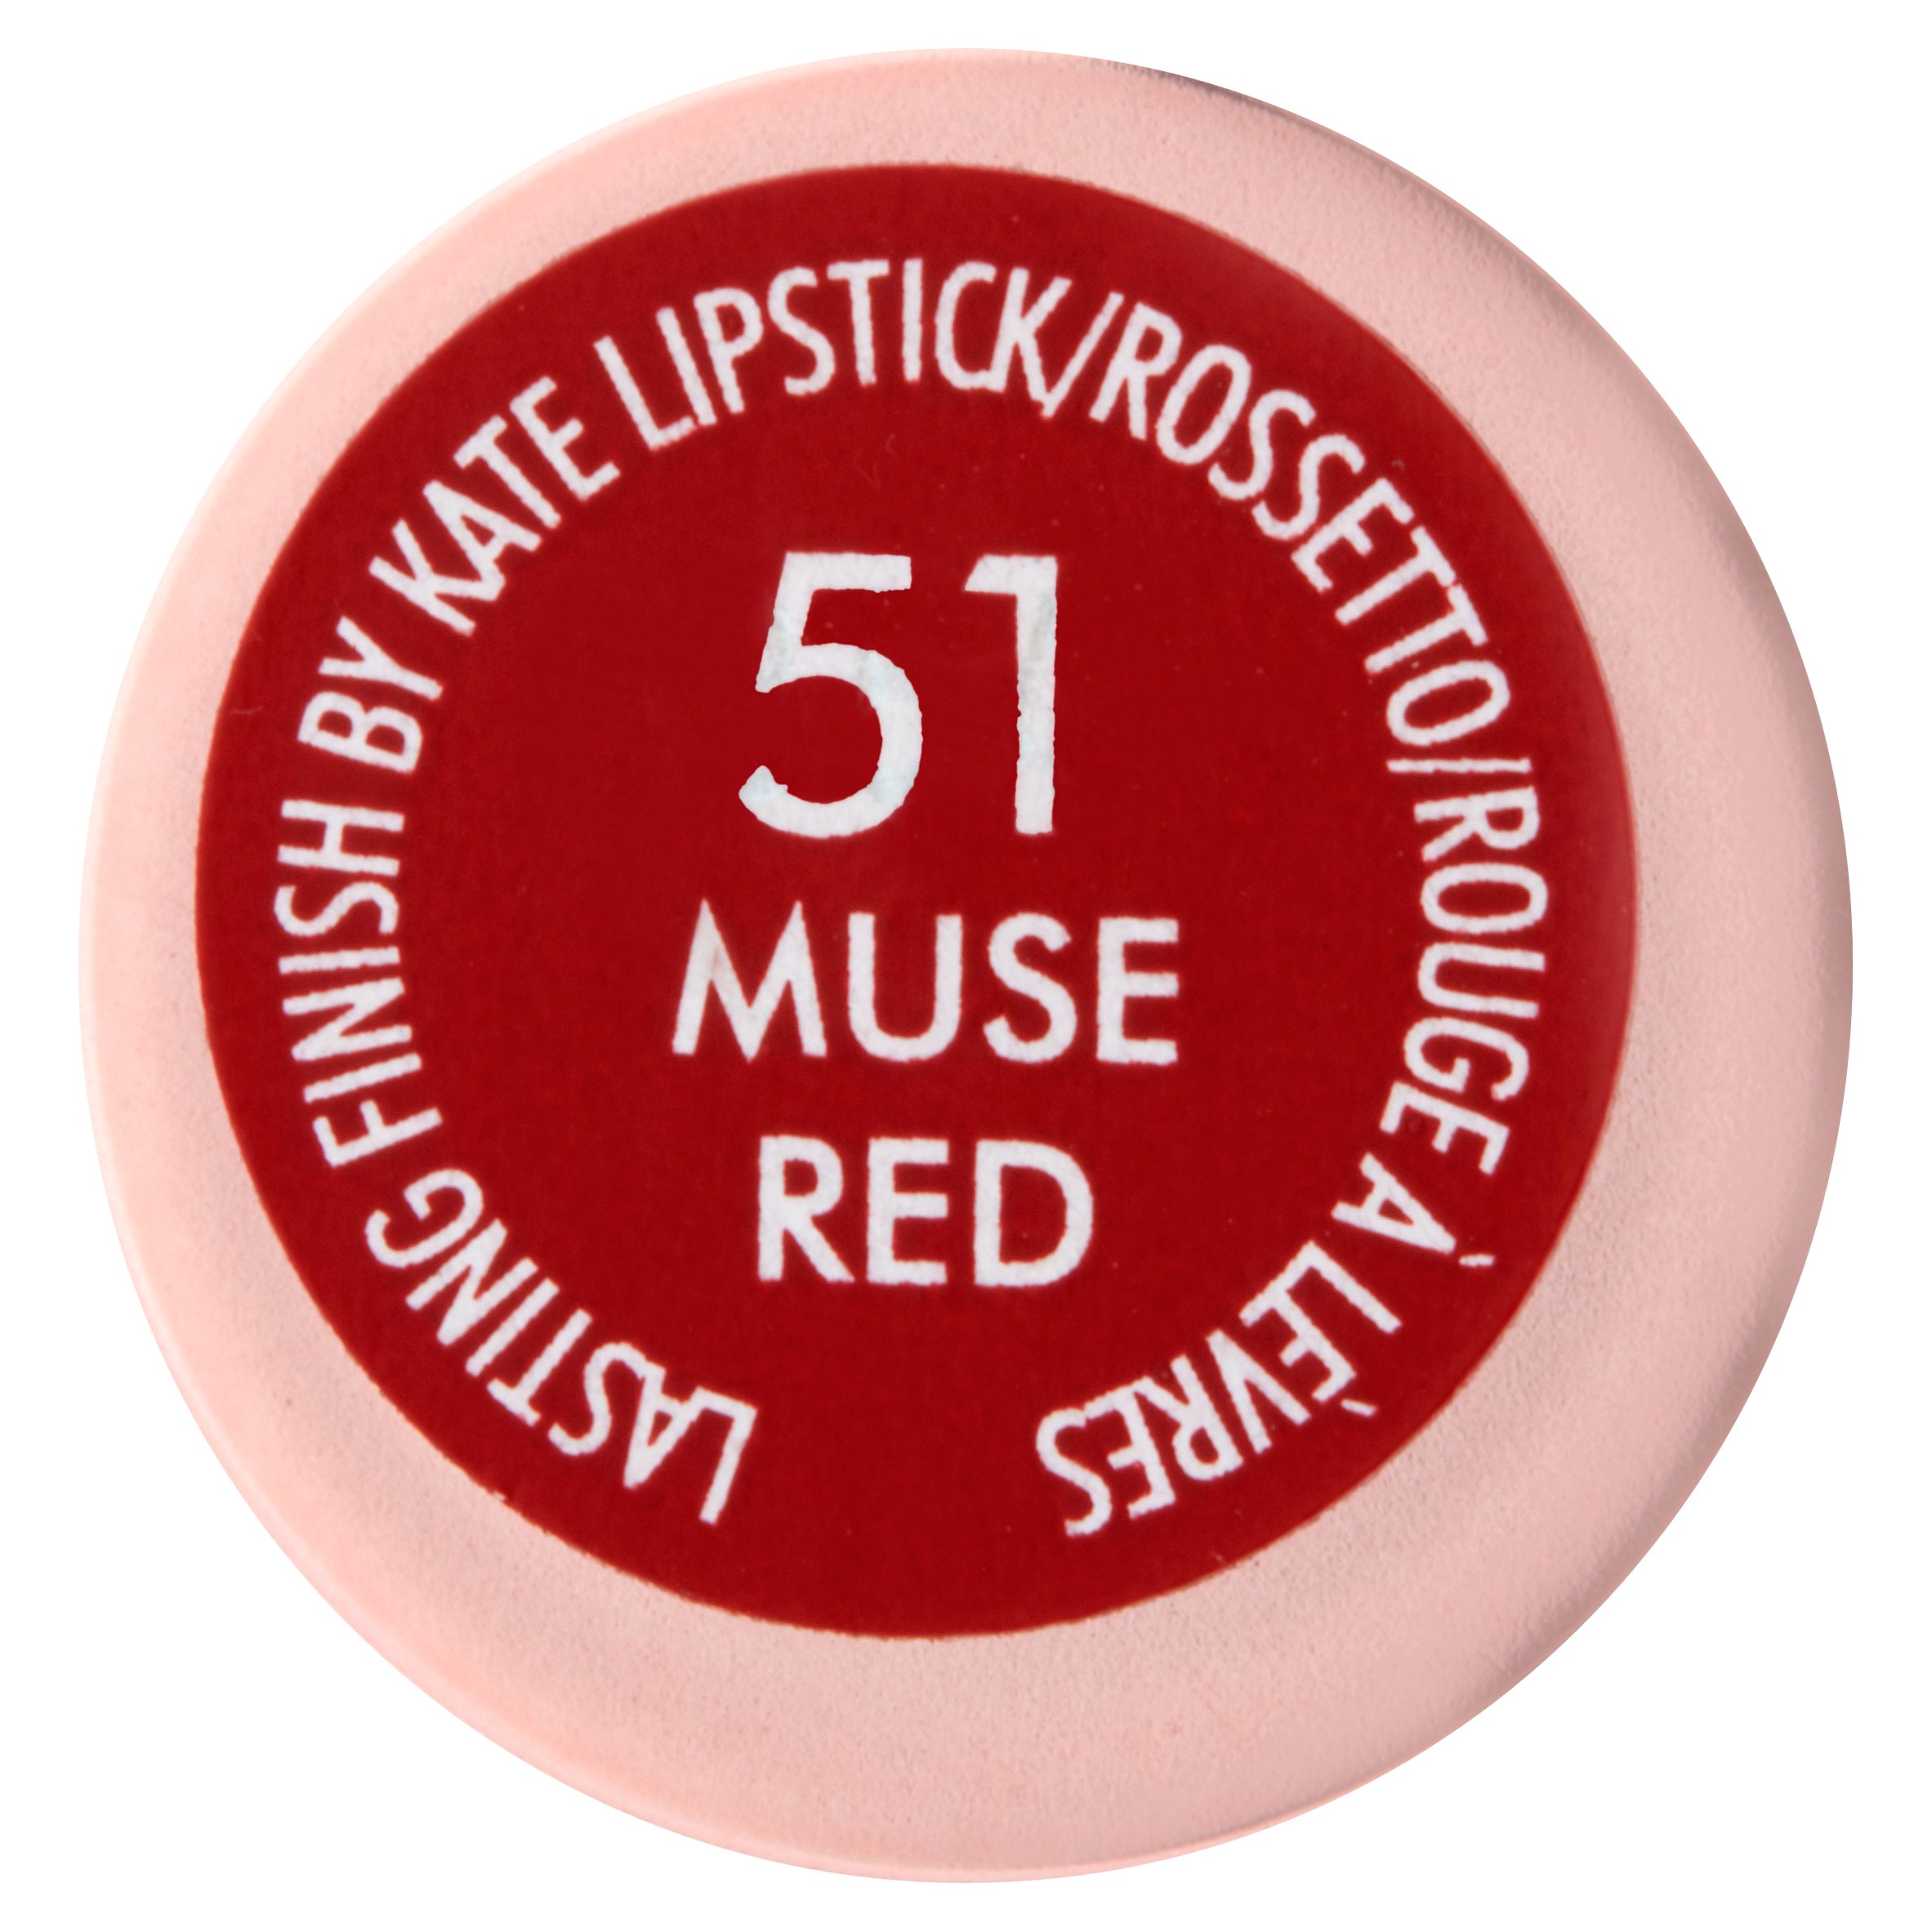 Rimmel London Lasting Finish by Kate 51 Muse Red Lipstick, 0.14 oz - image 4 of 4